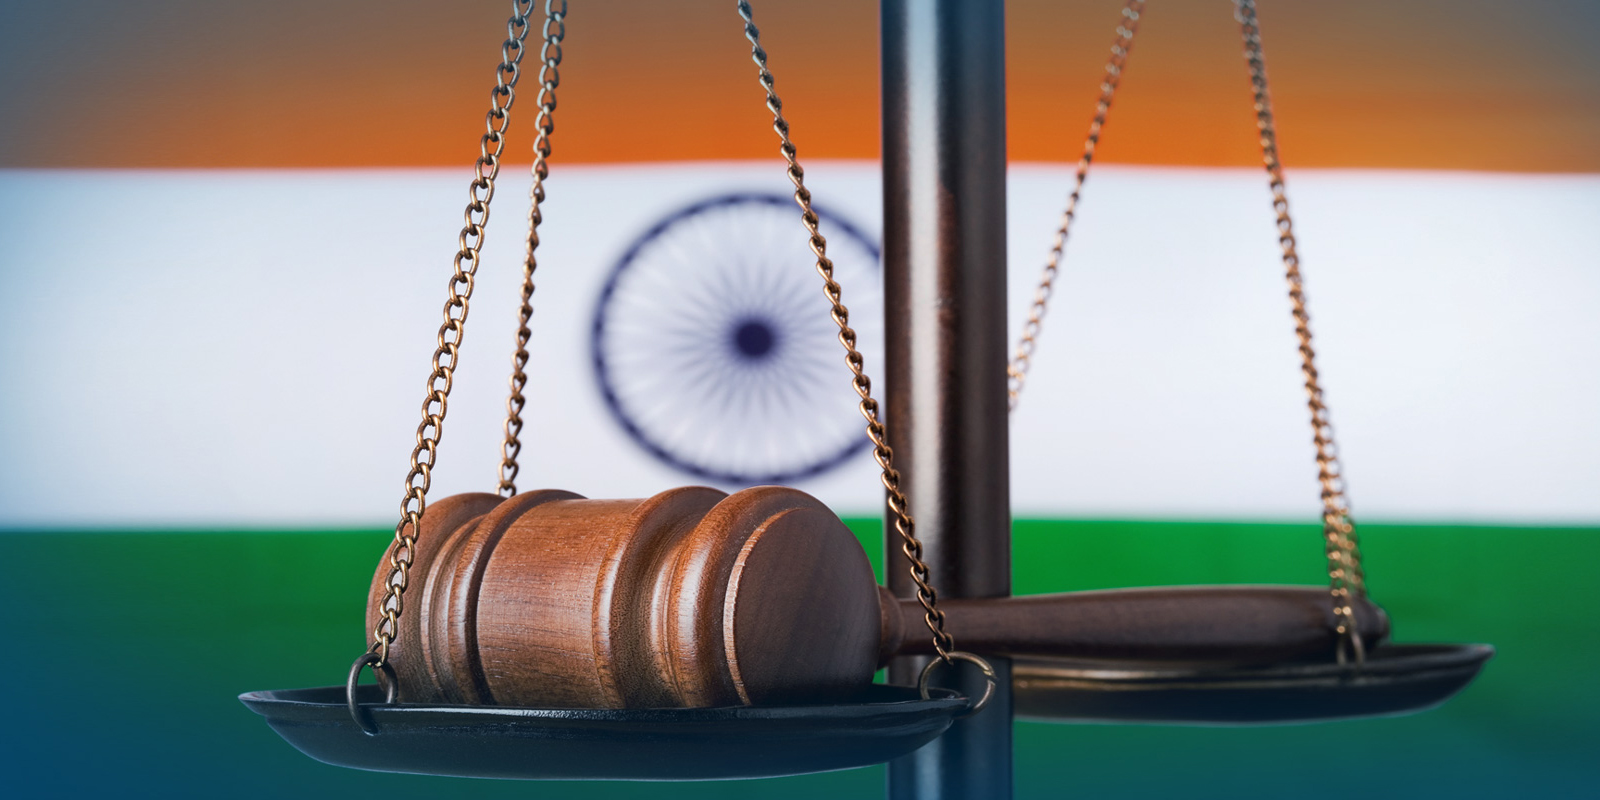 Proposed Amendments to India's Arbitration Act